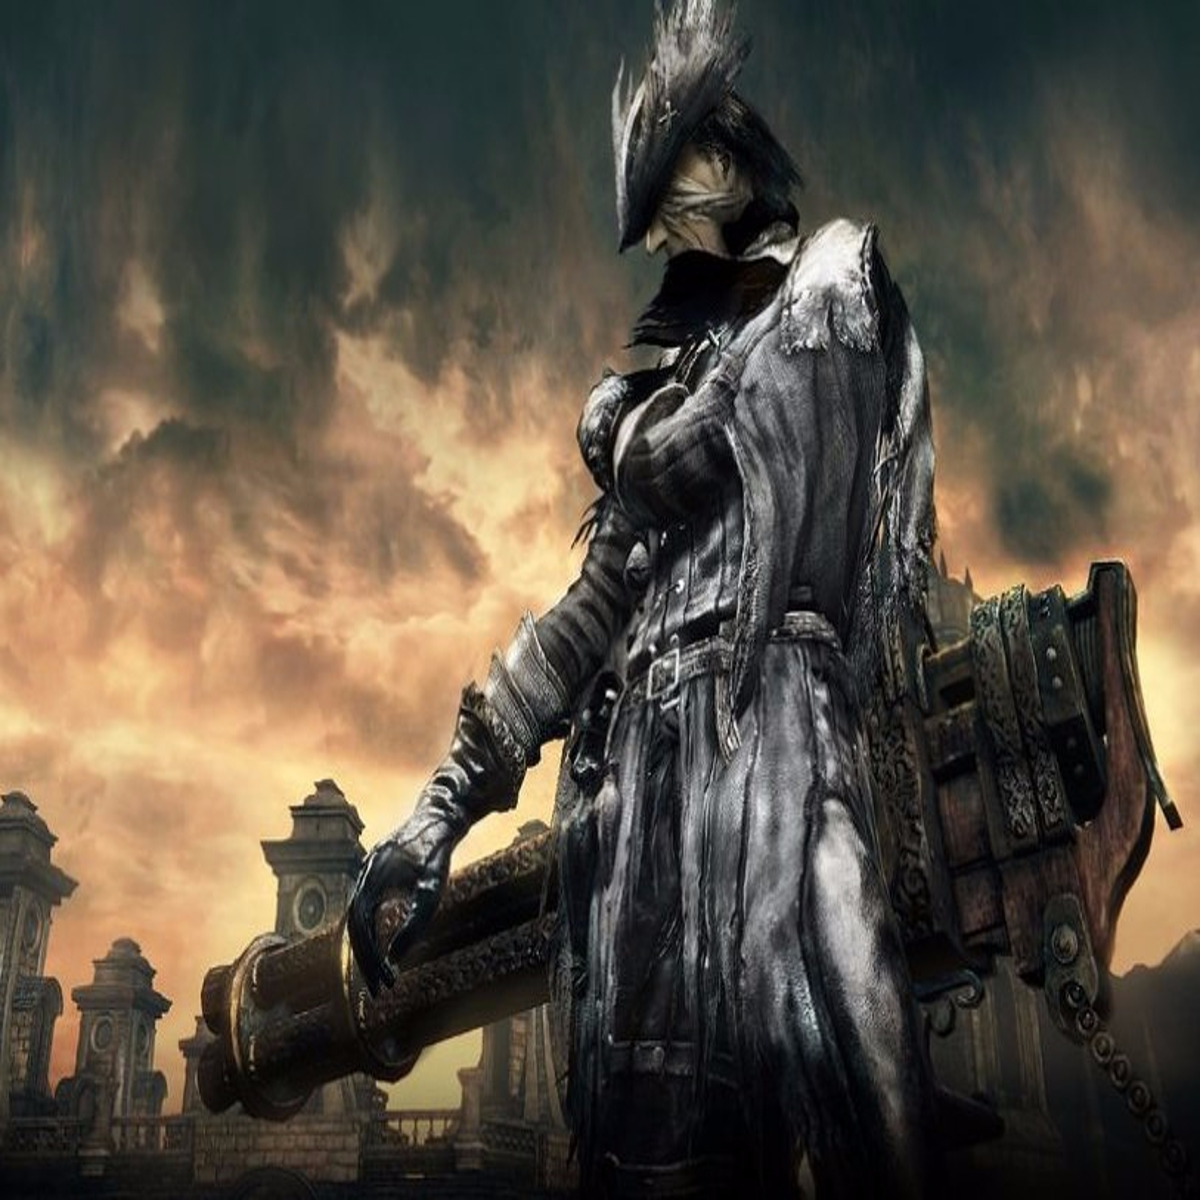 Did bloodborne win game of the year? - Quora